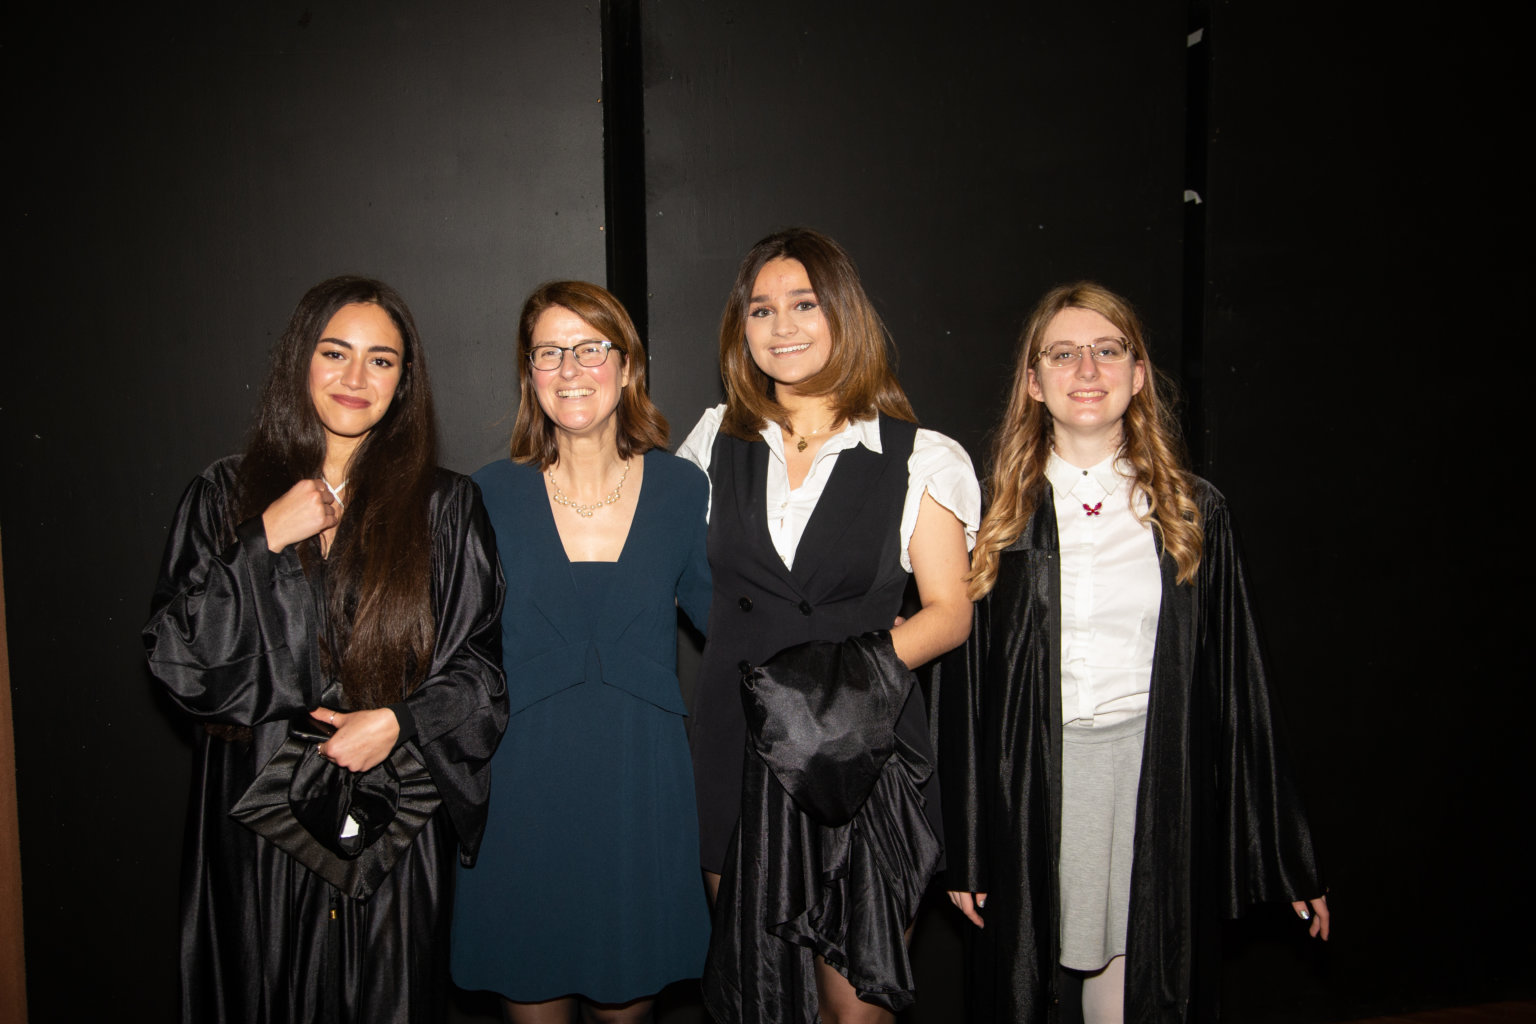 Lycée Condorcet 2021 graduates with French baccalaureate diploma